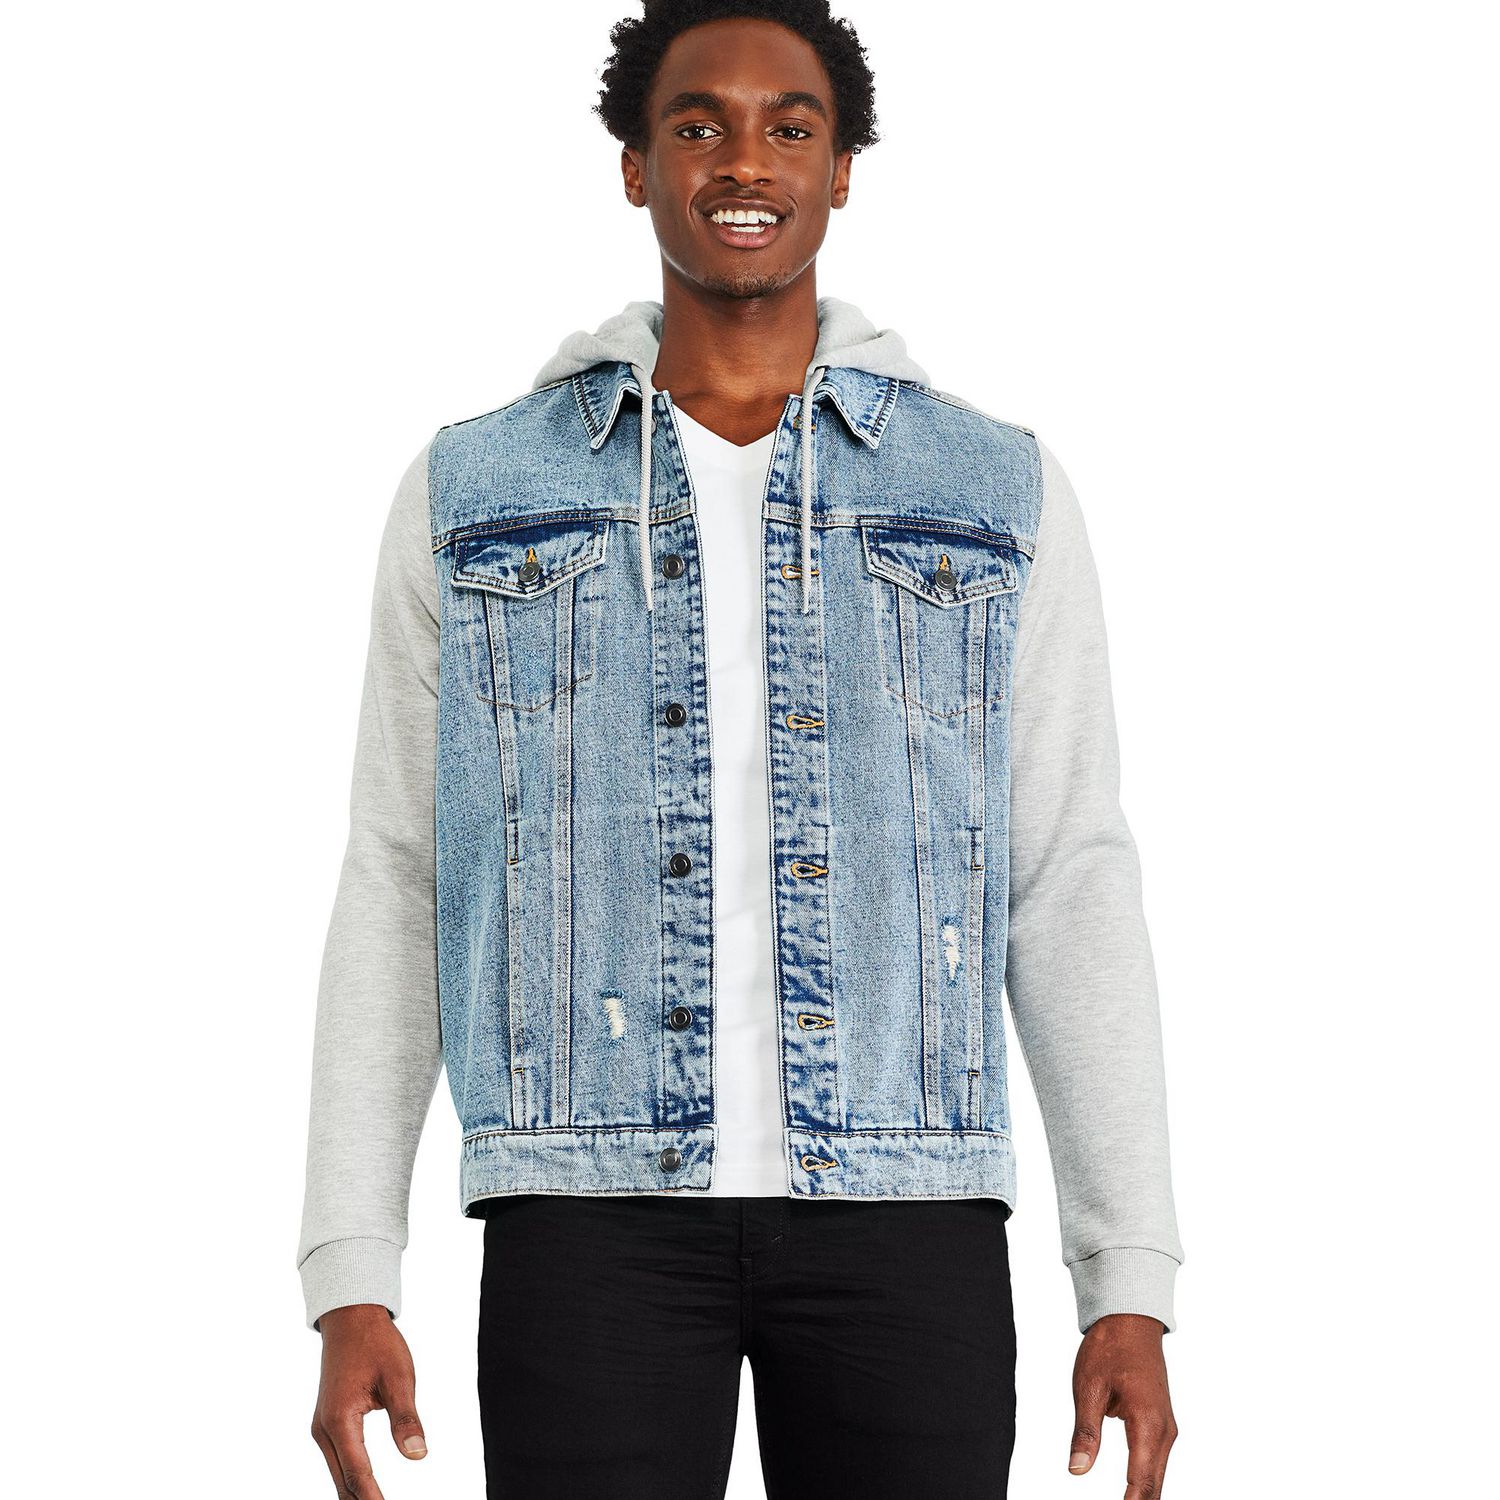 6 Go-To Outfit Combinations For Men | FashionBeans | Jean jacket outfits  men, Denim jacket men outfit, Mens casual outfits